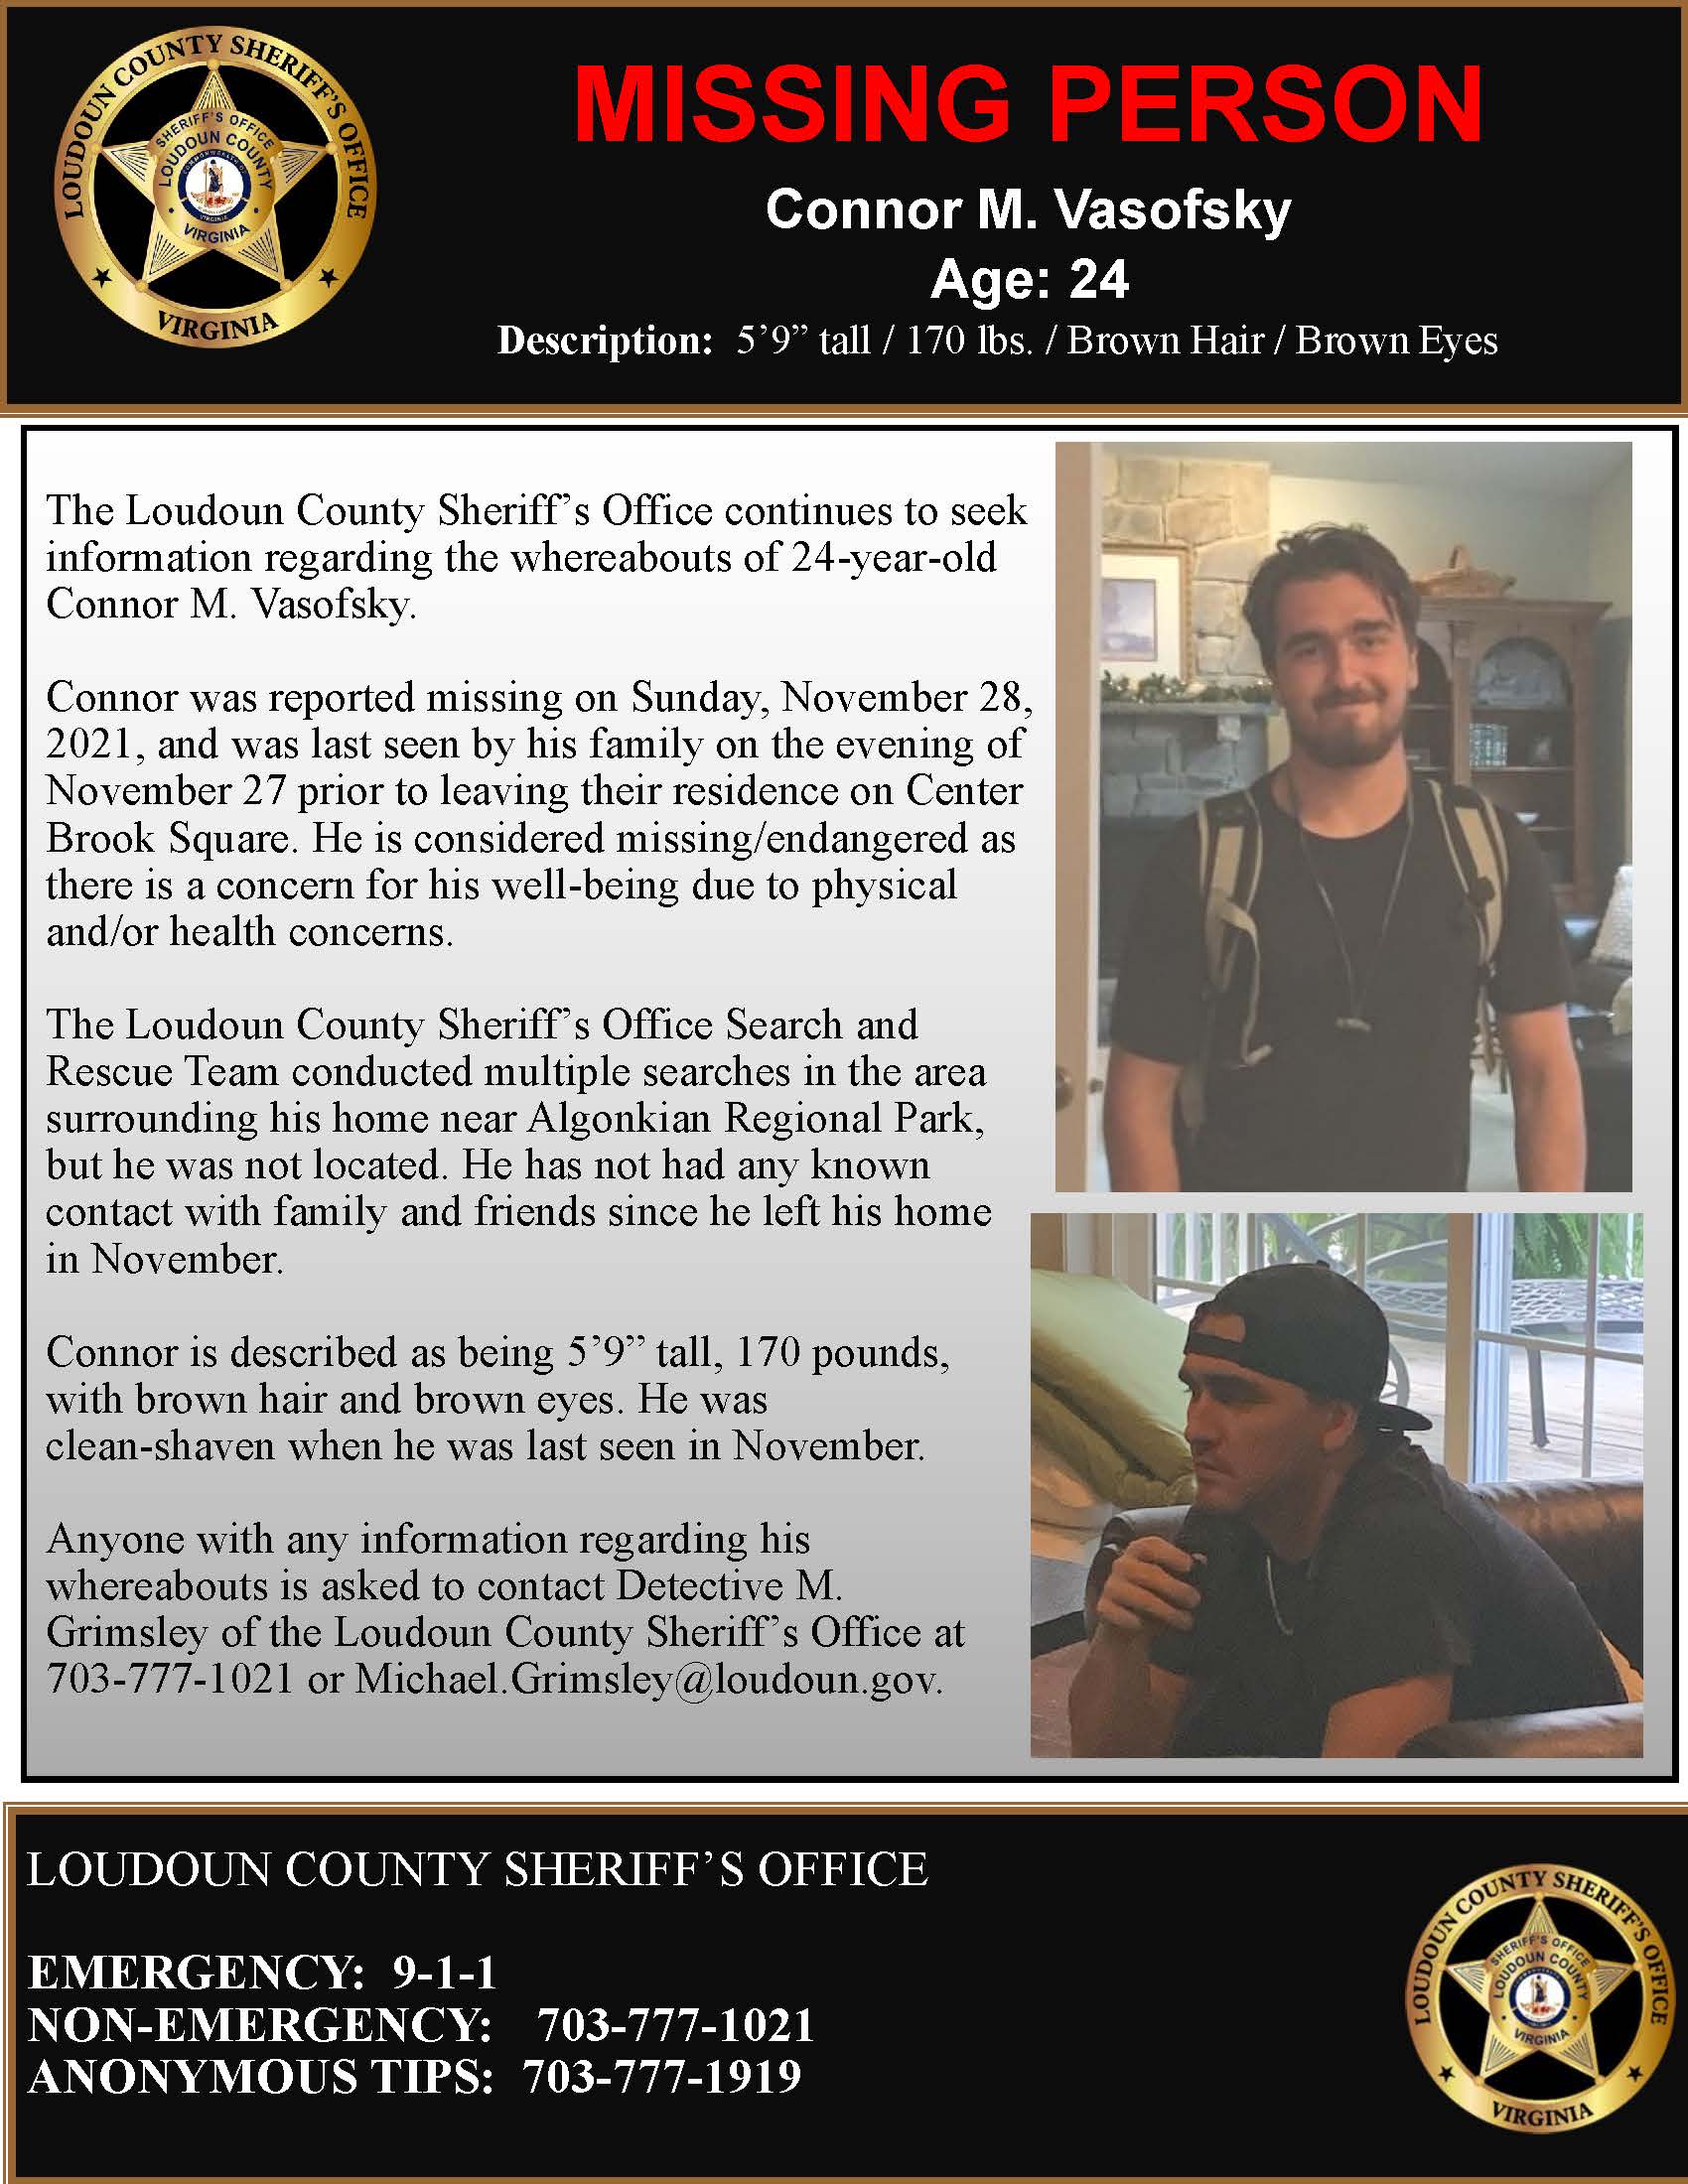 MISSING PERSON- Connor Vasofsky